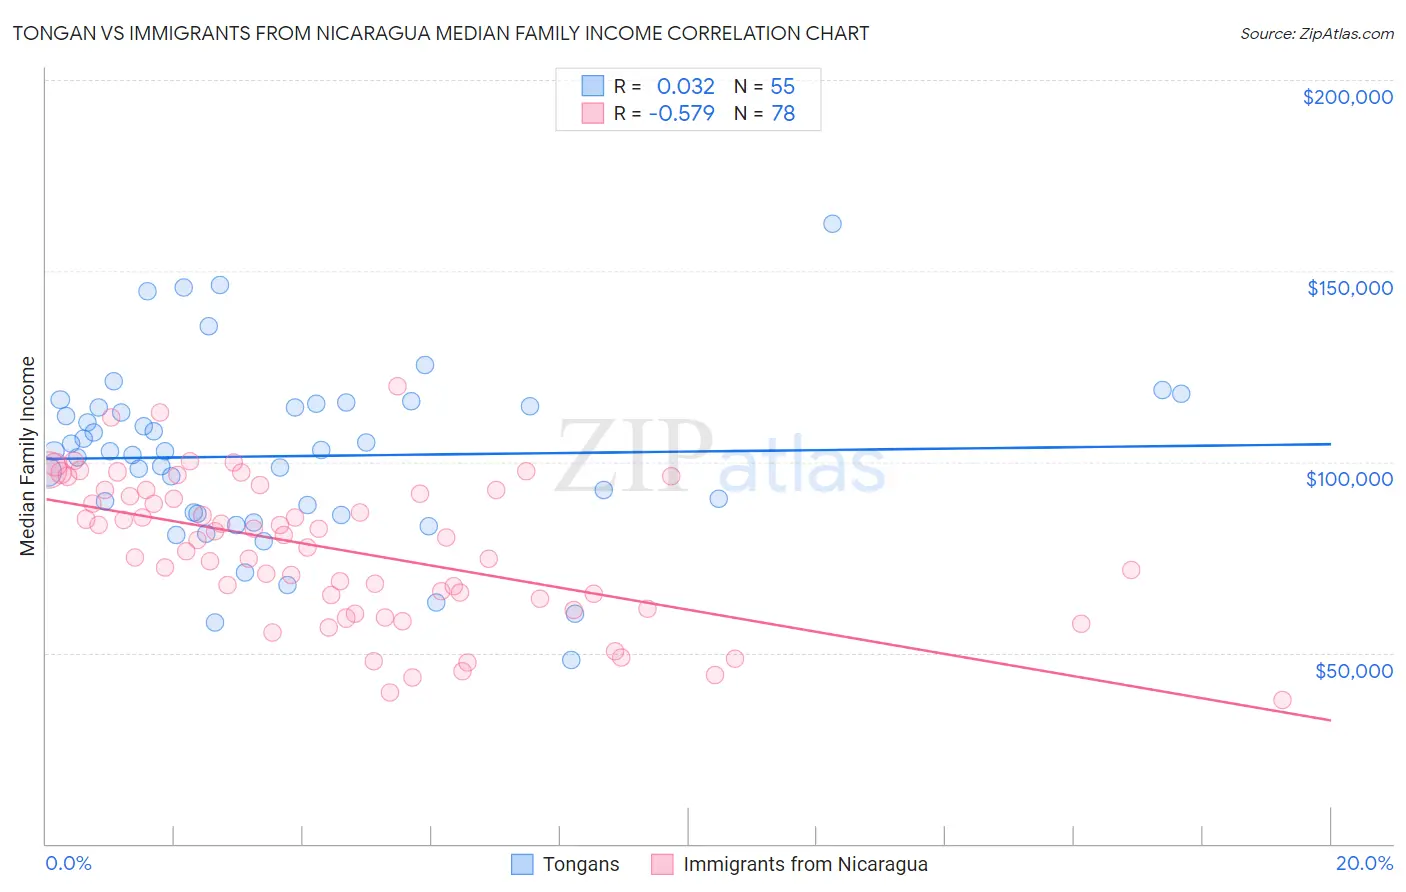 Tongan vs Immigrants from Nicaragua Median Family Income